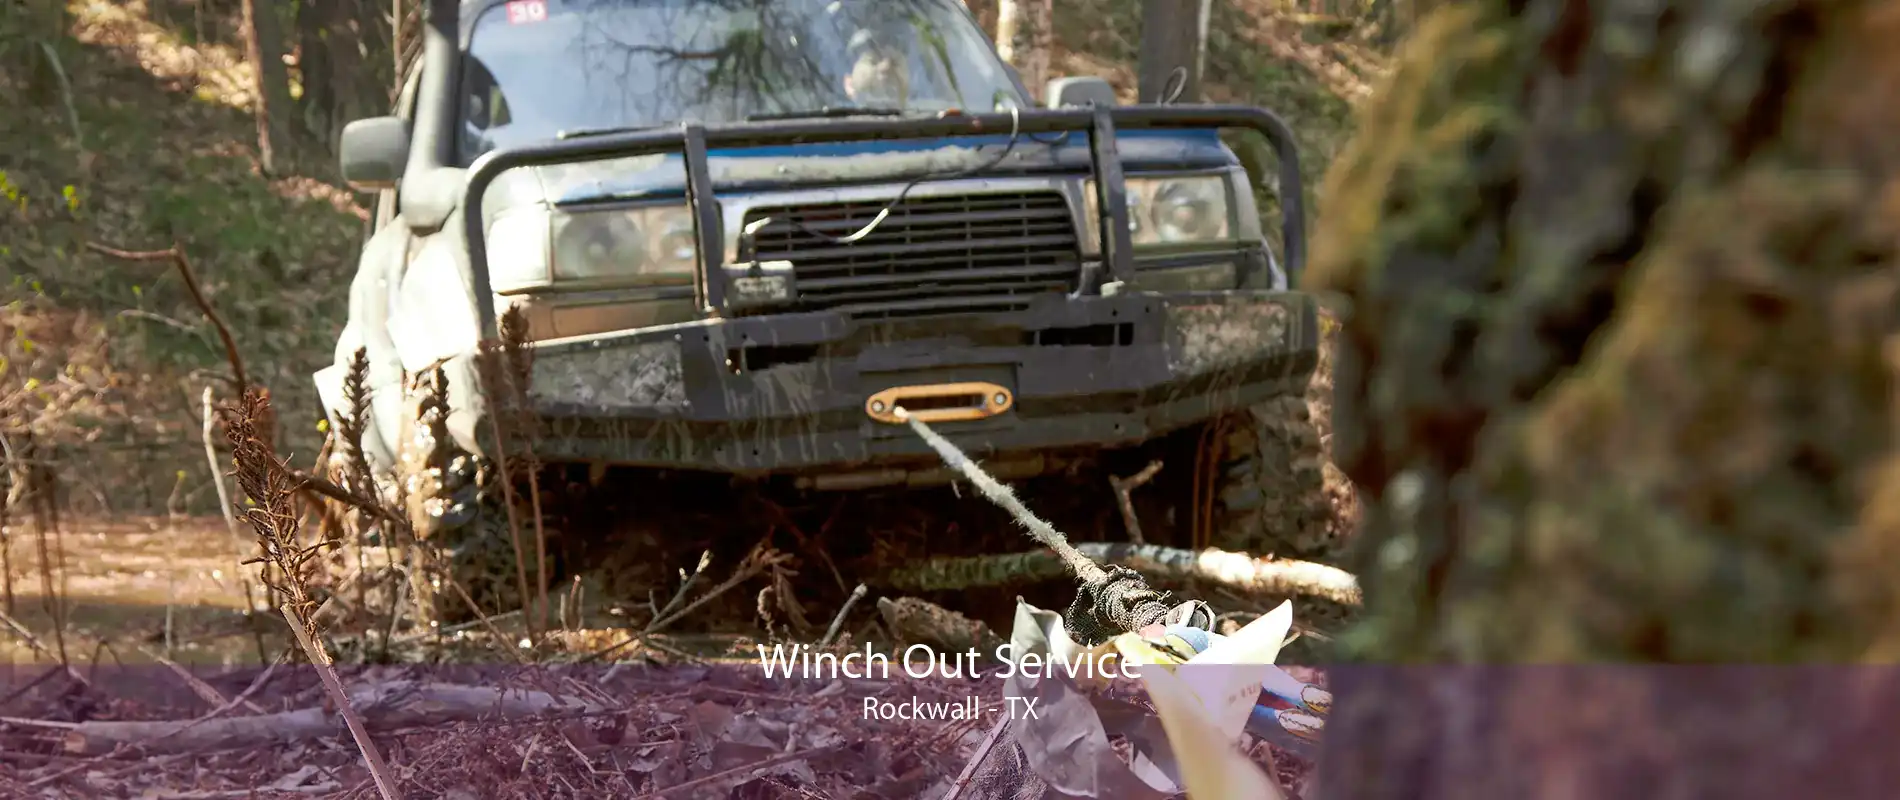 Winch Out Service Rockwall - TX